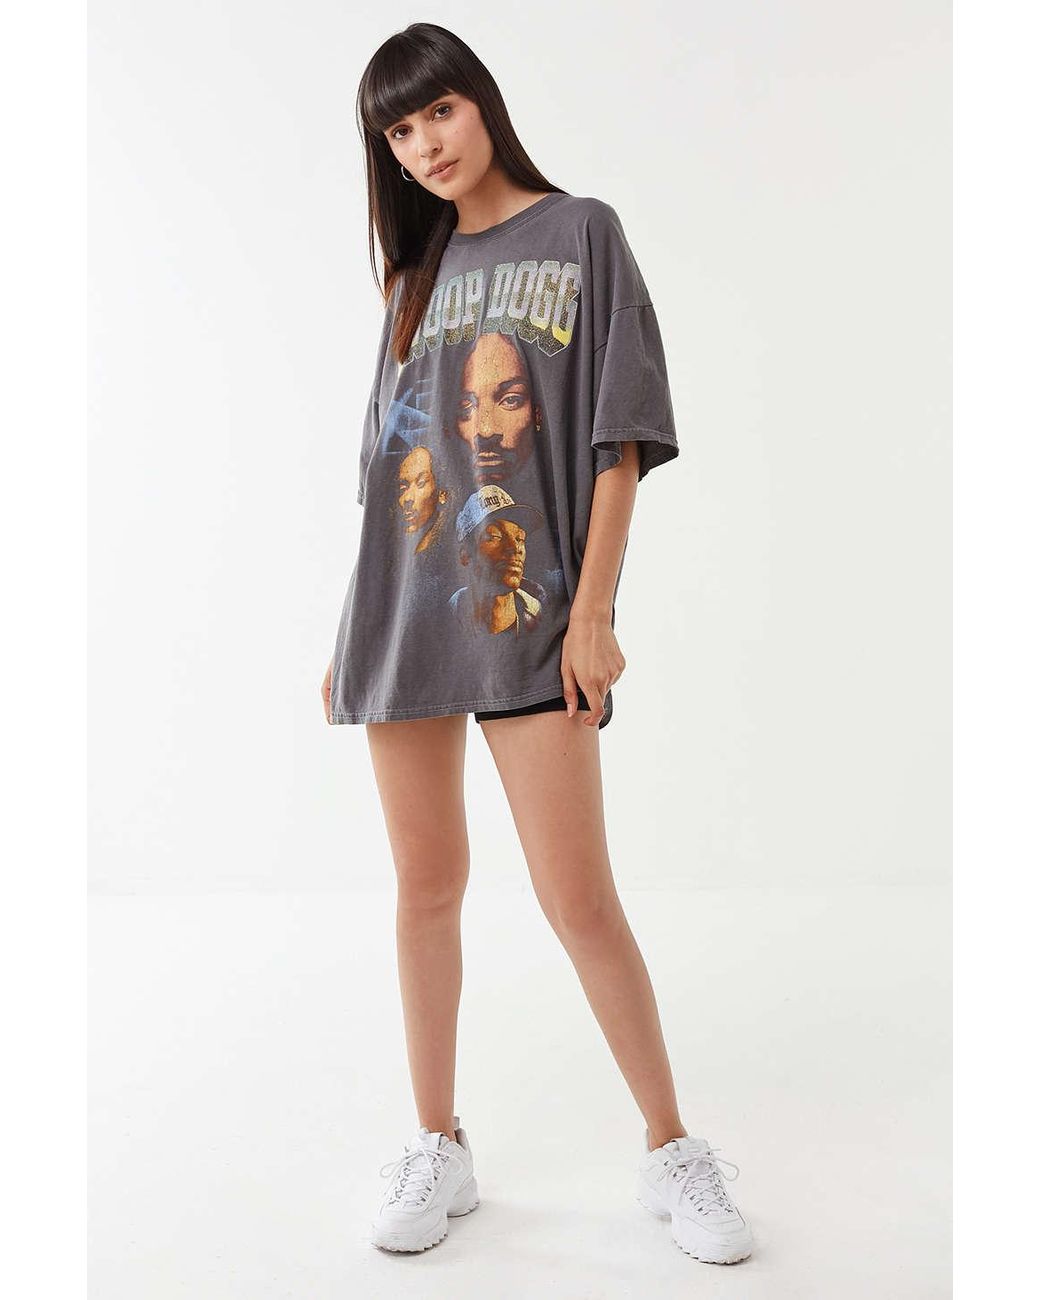 Snoop Dogg Gin And Juice T-Shirt Dress  Urban Outfitters Japan - Clothing,  Music, Home & Accessories